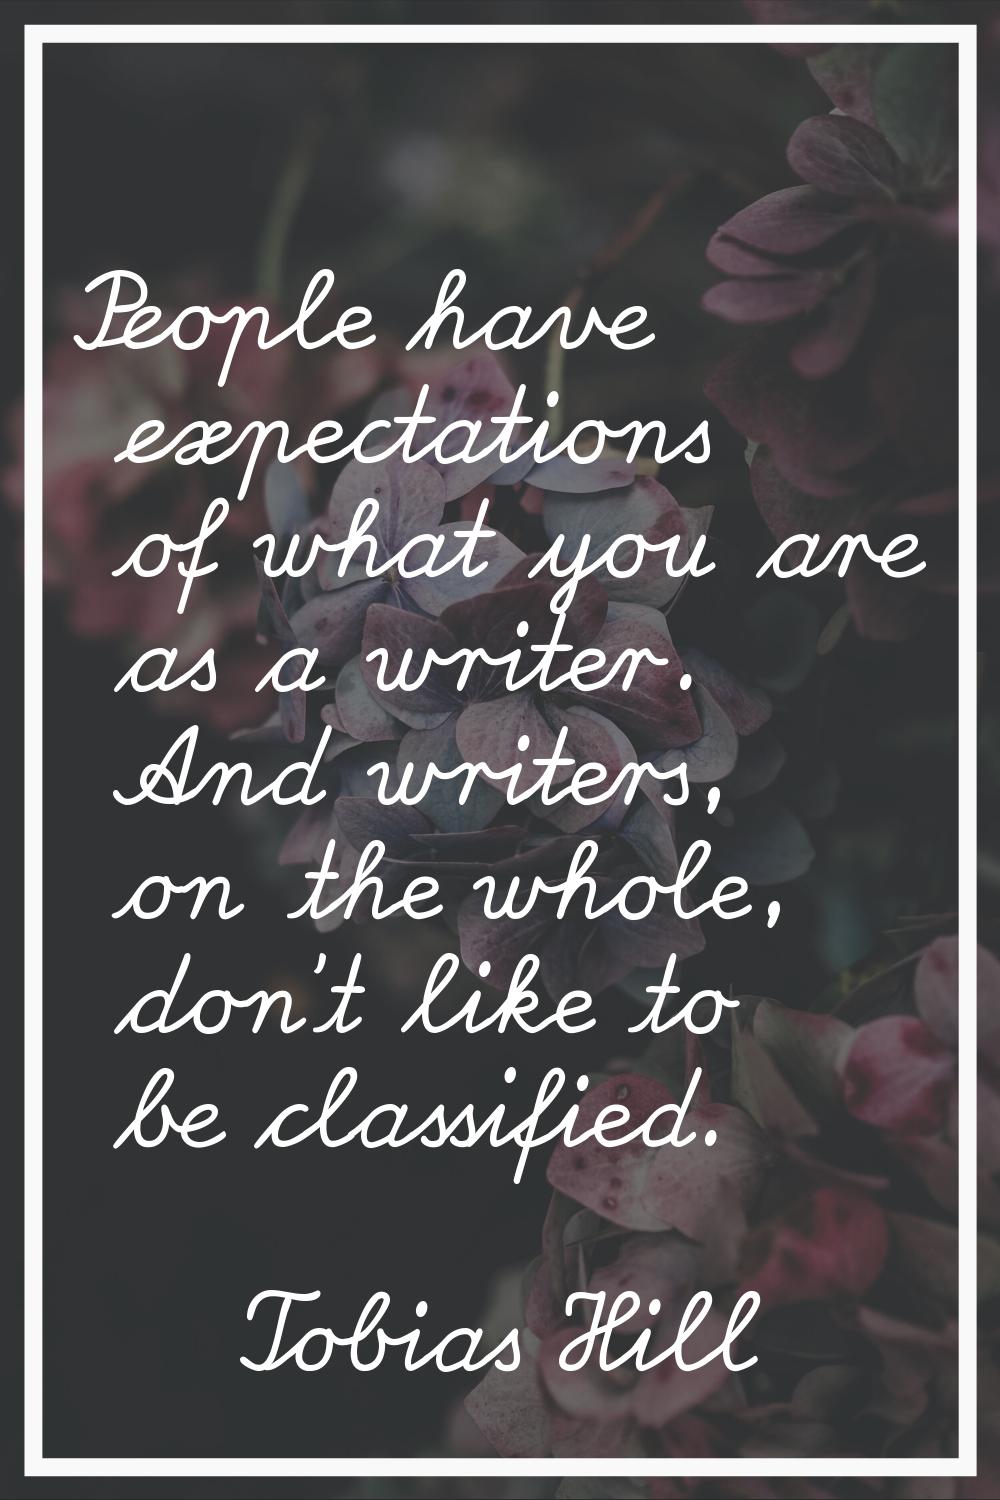 People have expectations of what you are as a writer. And writers, on the whole, don't like to be c